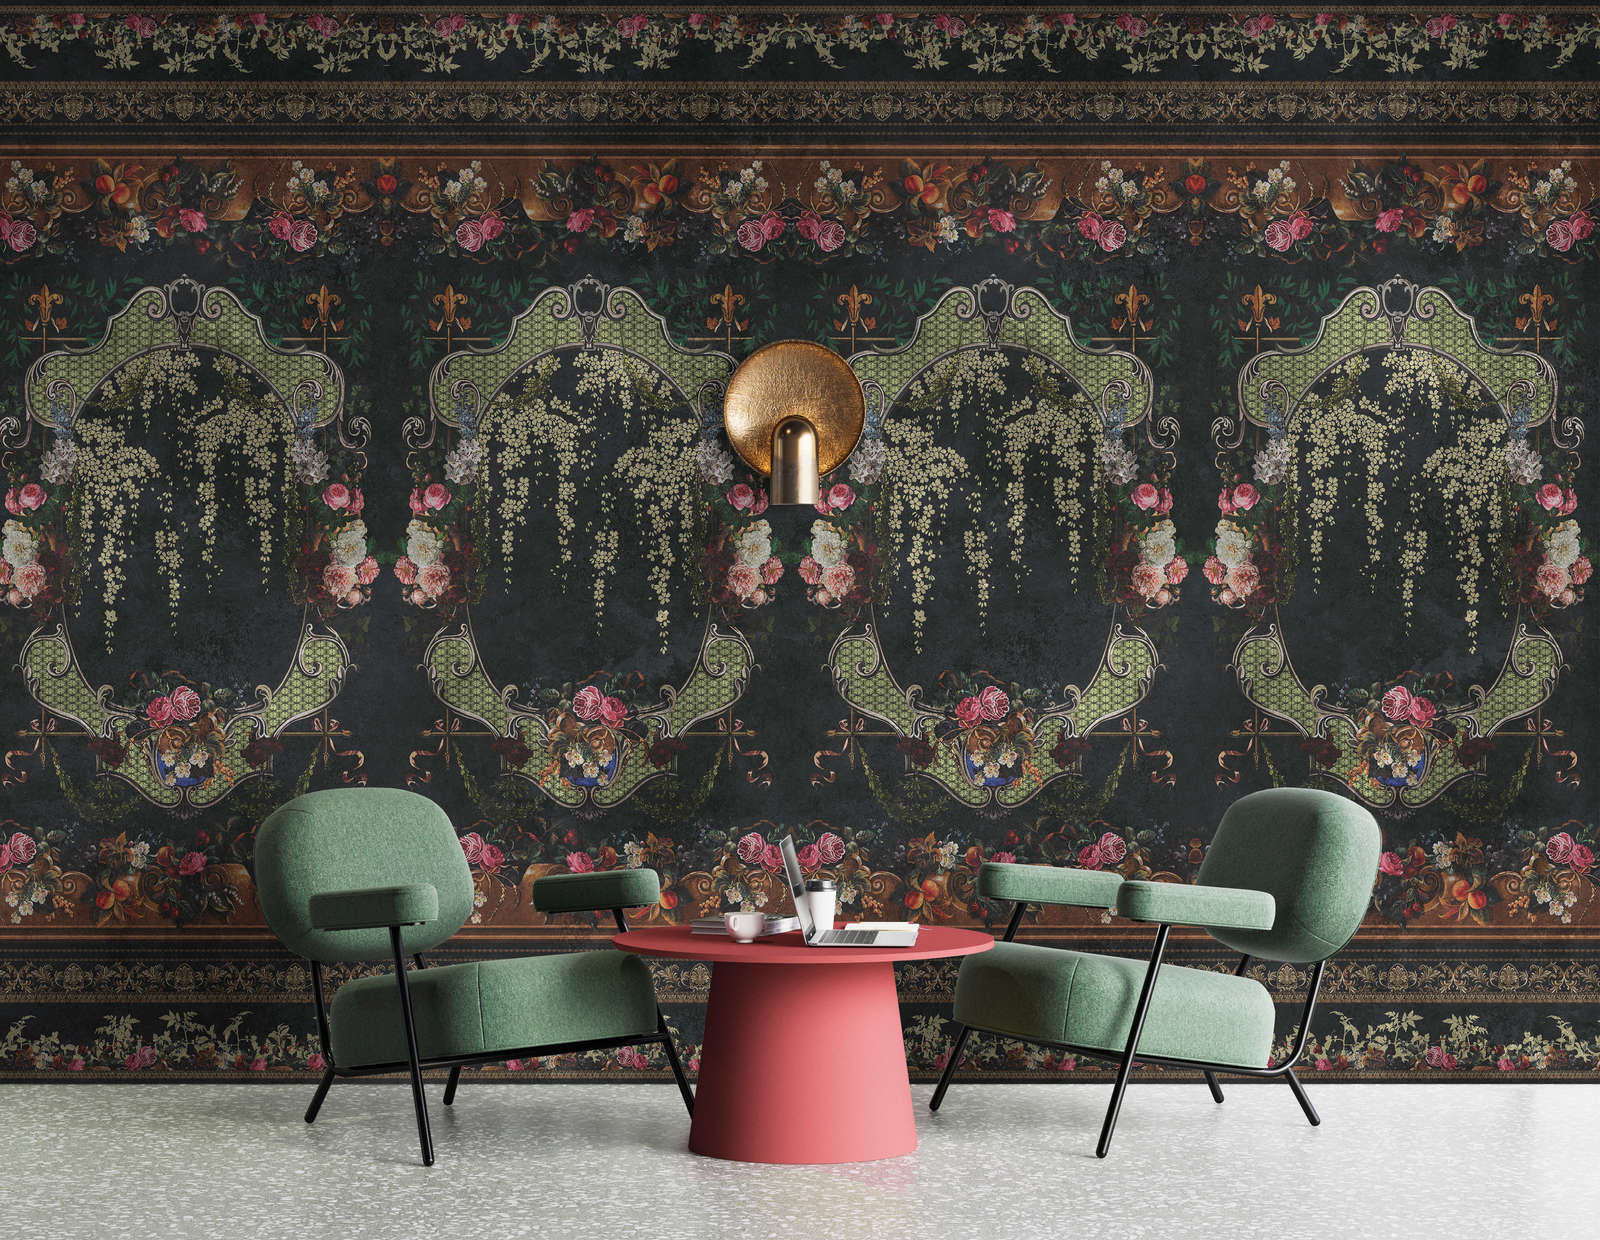             Photo wallpaper »babette« - Ornamental panelling with floral design on vintage plaster texture - red, dark blue | Smooth, slightly pearlescent non-woven fabric
        